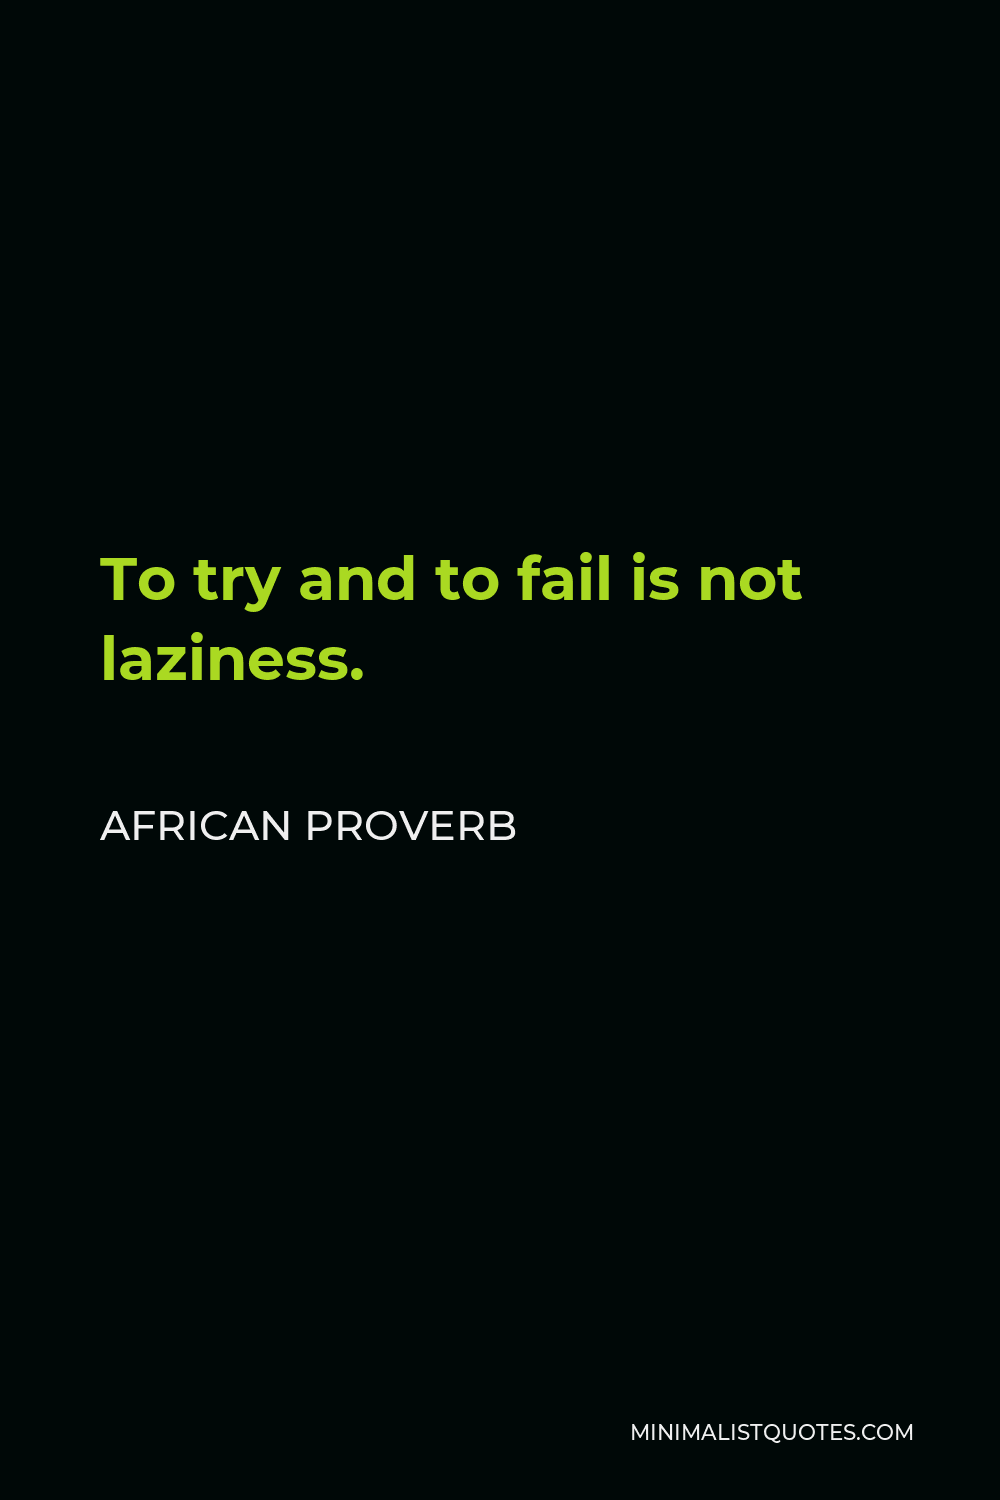 African Proverb Quote - To try and to fail is not laziness.